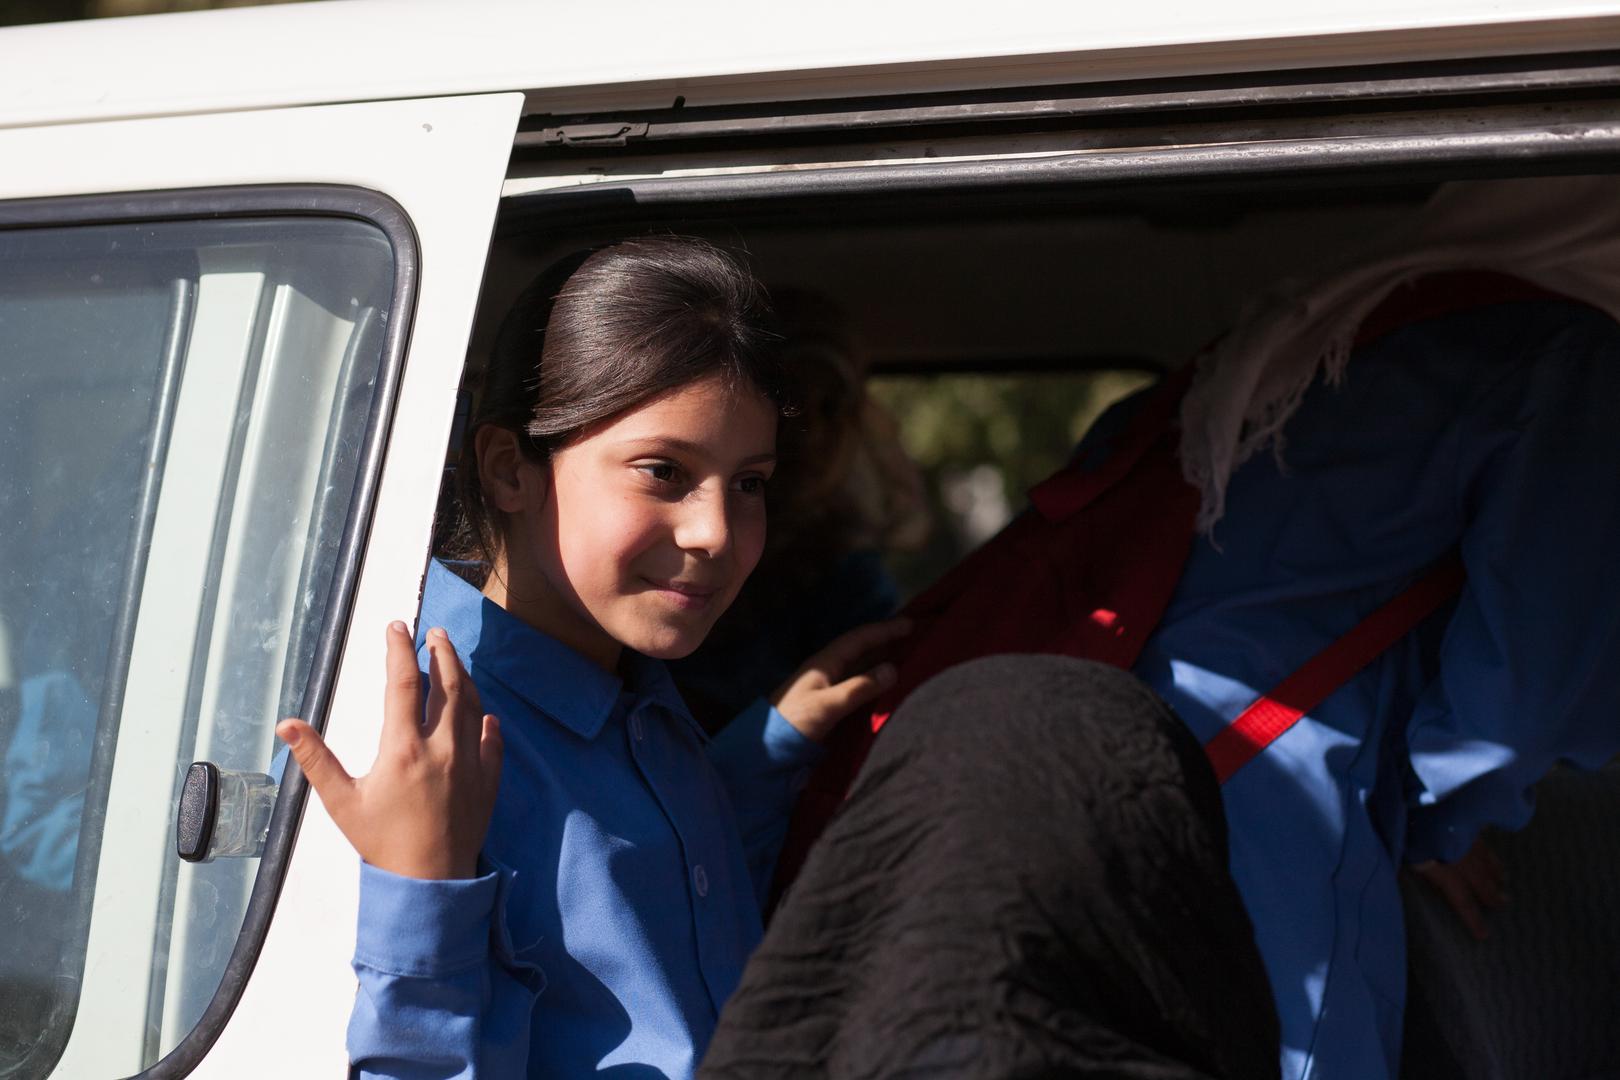 Bara’a boards her school bus after two years without a formal education.